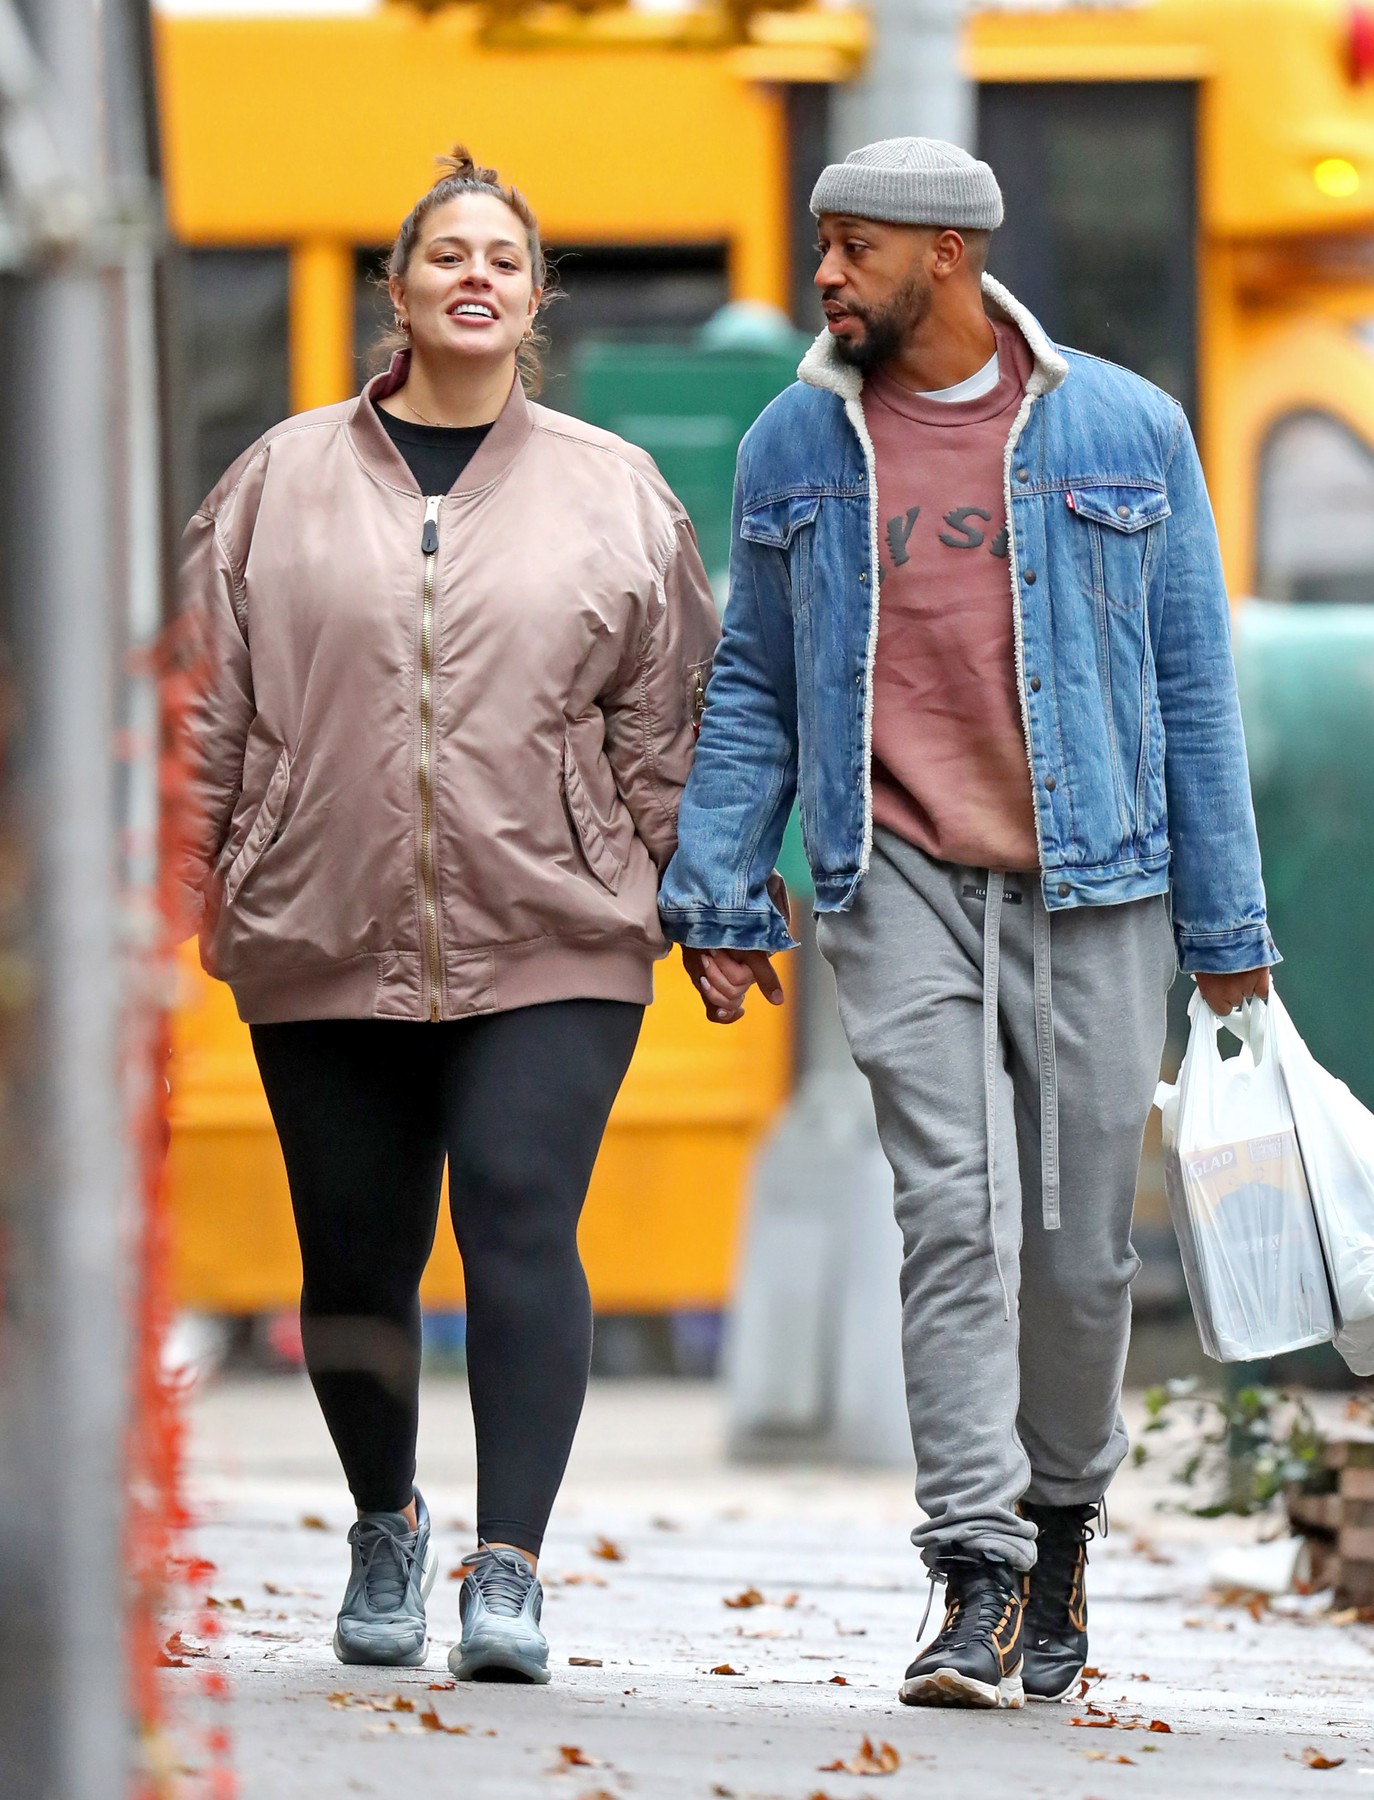 11/23/2019 EXCLUSIVE: Ashley Graham shows her growing baby bump while out with her husband Justin Ervin in New York City. The 32 year old model carried a Cartier purse and wore a pink Alpha bomber jacket, black leggings, and sneakers., Image: 484472736, License: Rights-managed, Restrictions: Exclusive NO usage without agreed price and terms. Please contact sales@theimagedirect.com, Model Release: no, Credit line: TheImageDirect.com / The Image Direct / Profimedia